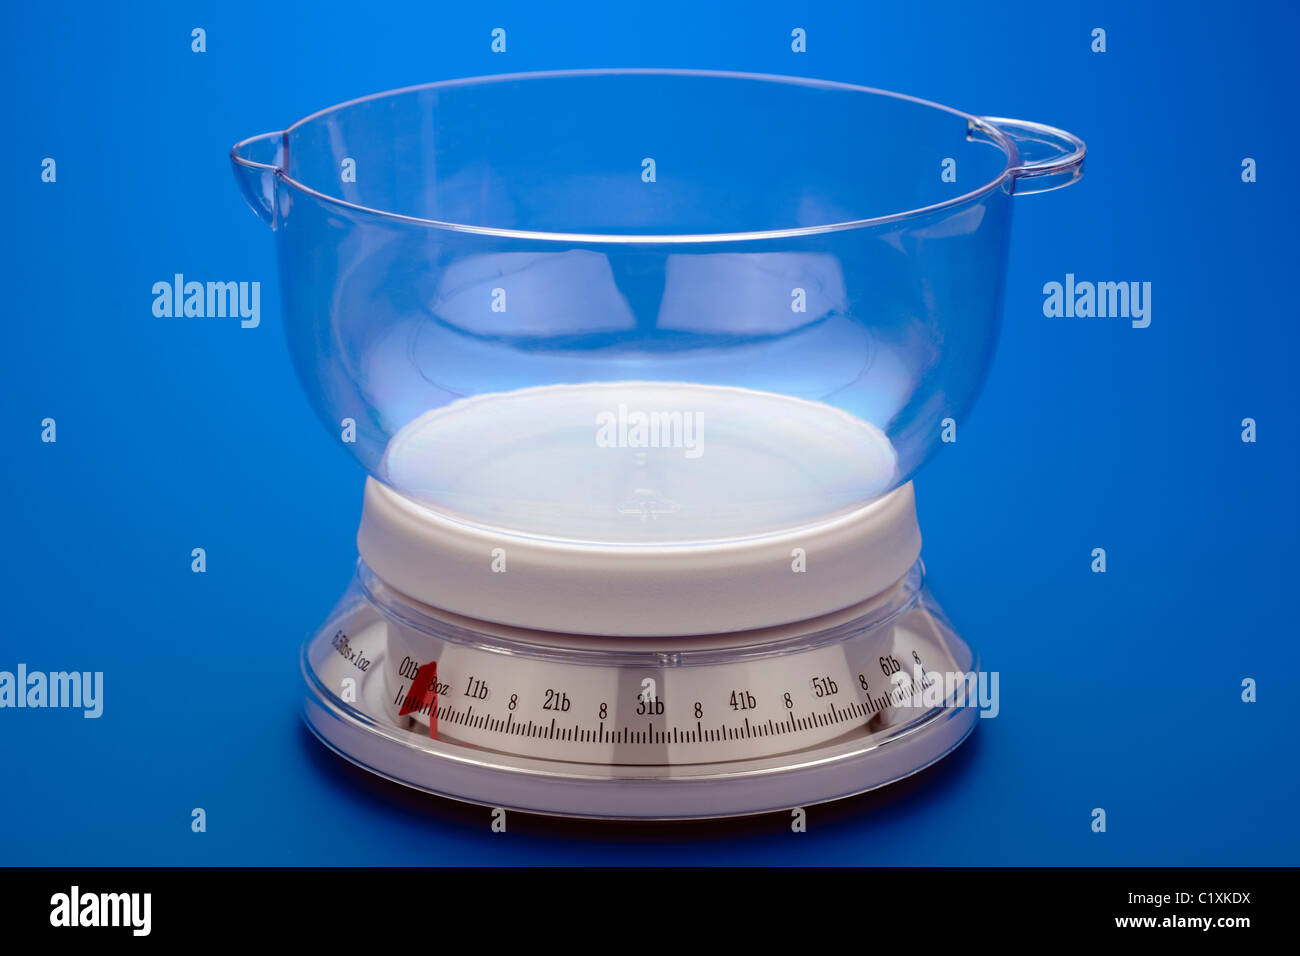 https://c8.alamy.com/comp/C1XKDX/set-of-circular-plastic-kitchen-weighing-scales-showing-weight-in-C1XKDX.jpg